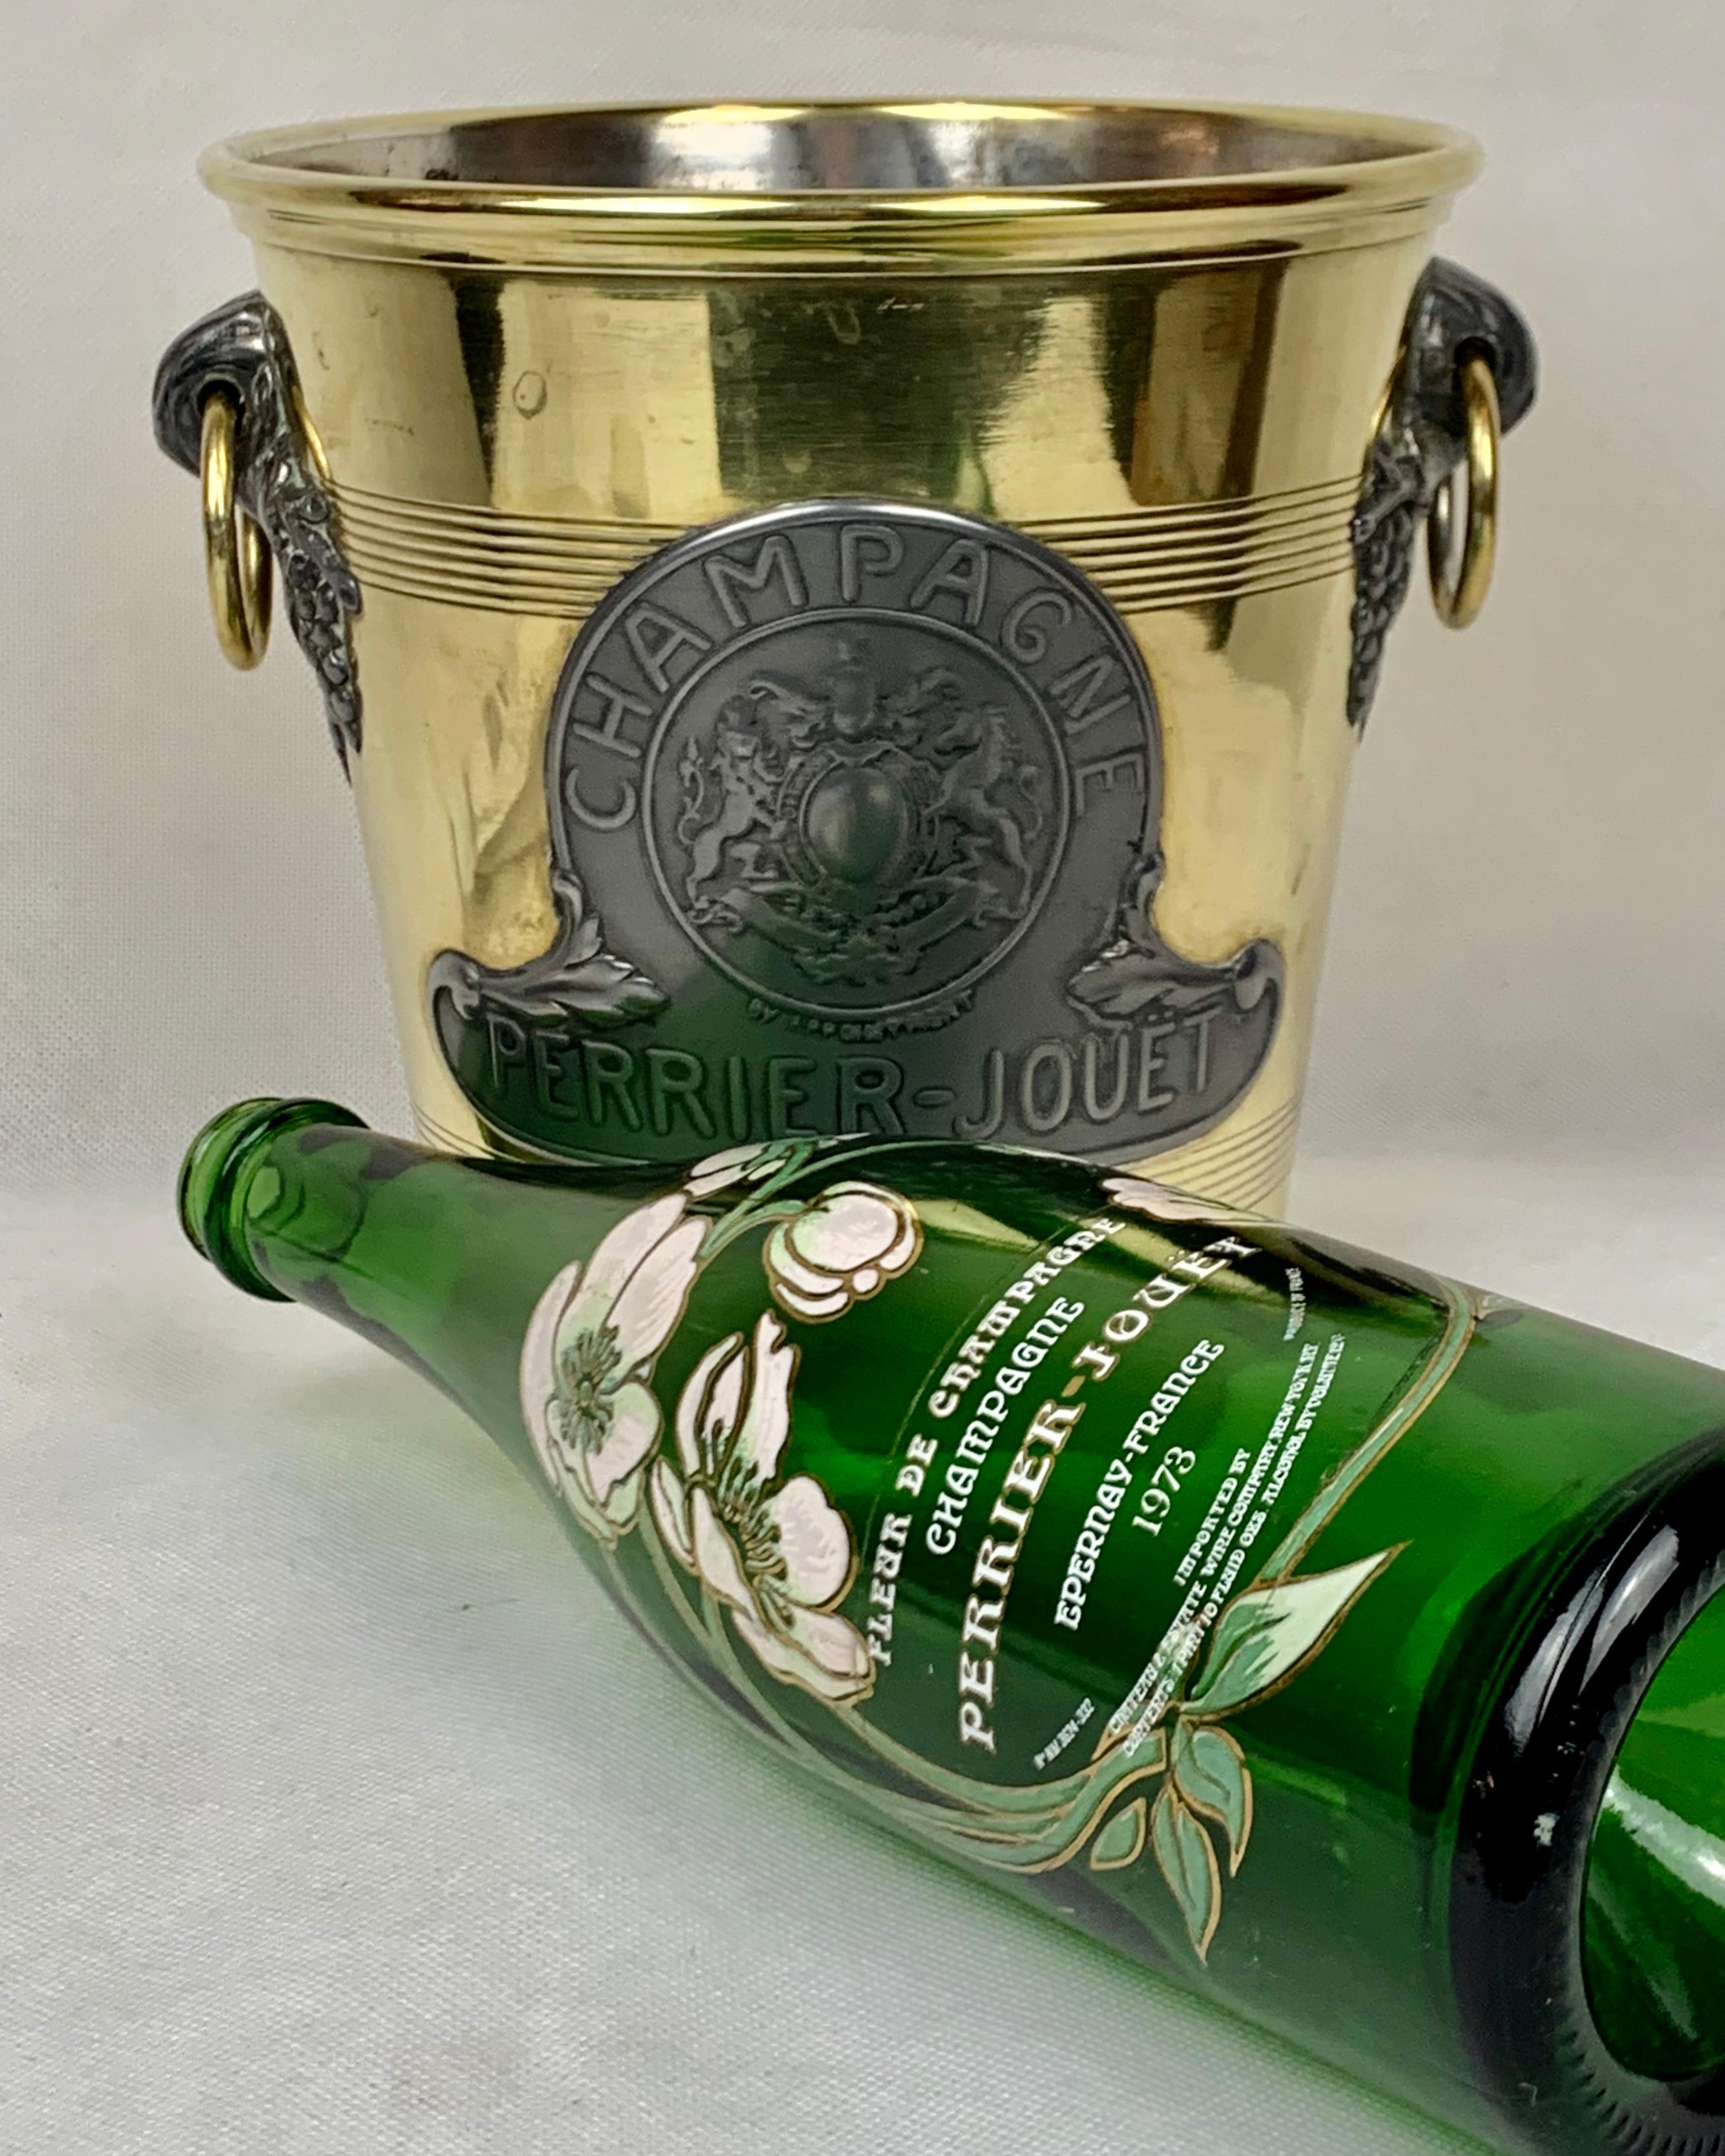  Antique Perrier-Jouet Champagne Cooler in Brass and Pewter Made by Argit, Paris 2